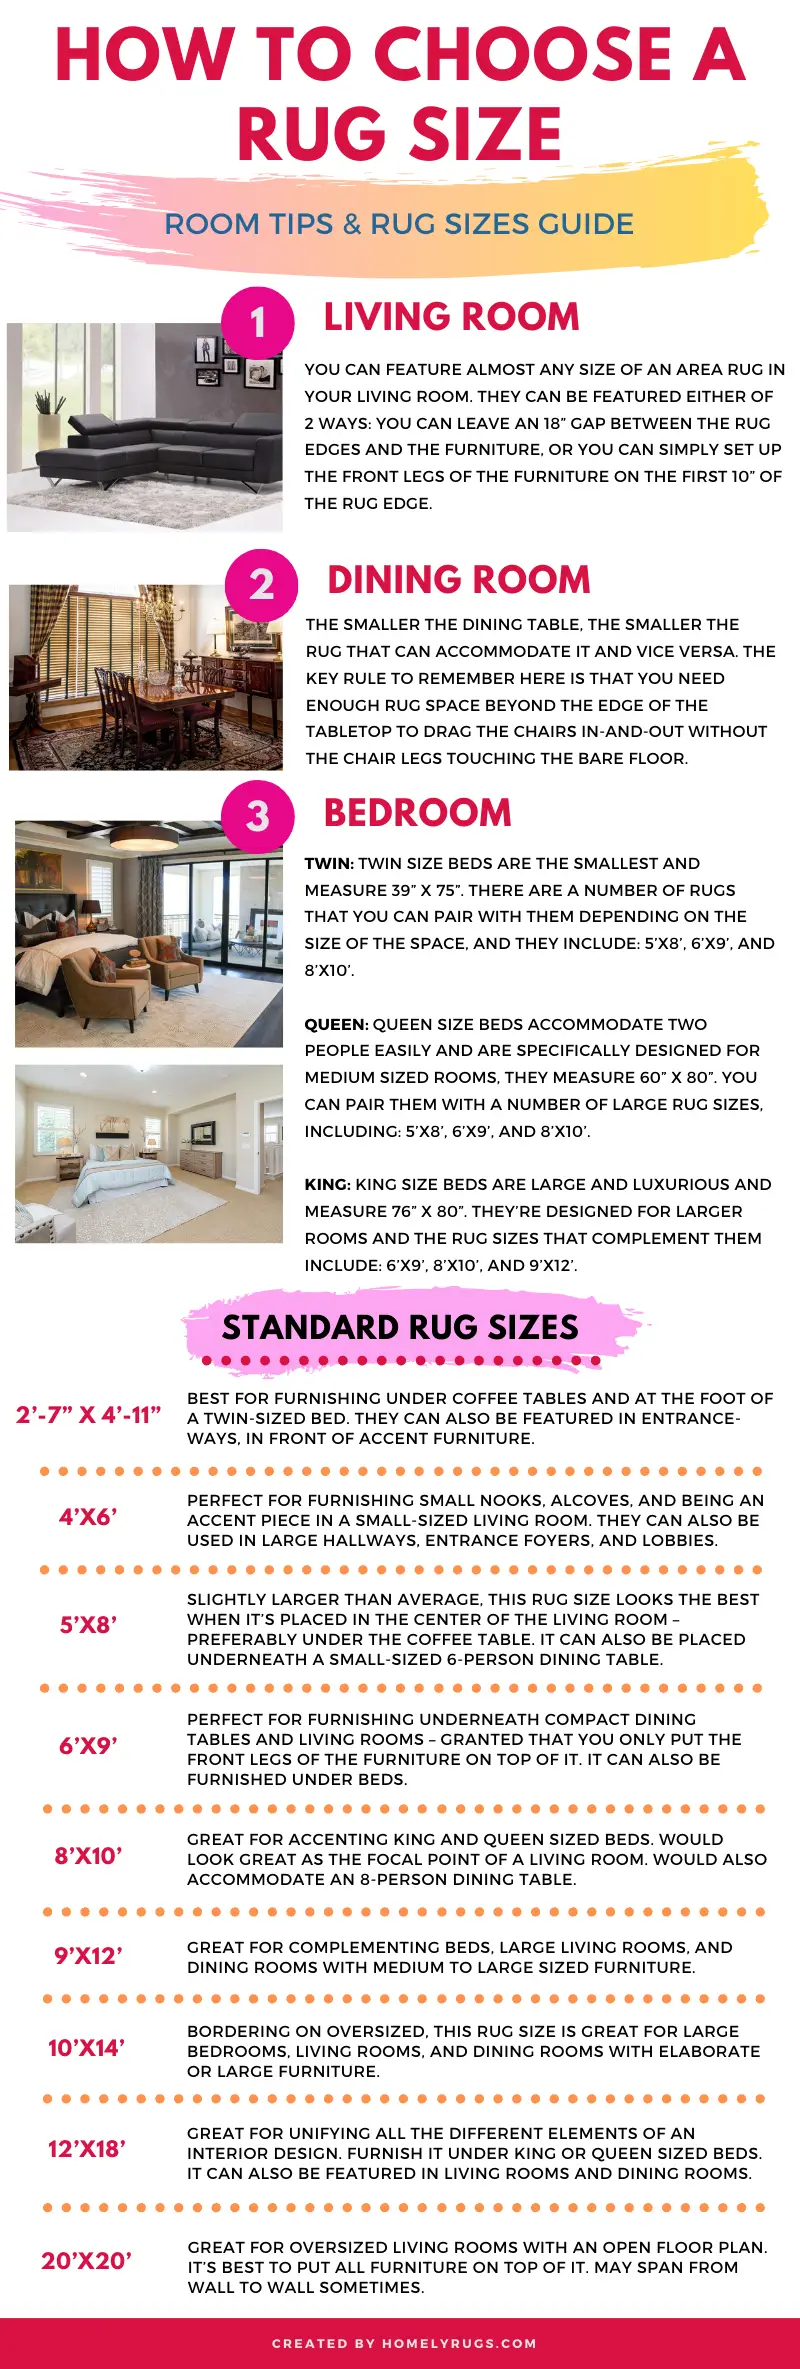 Standard Rug Sizes Chart & Guide Infographic